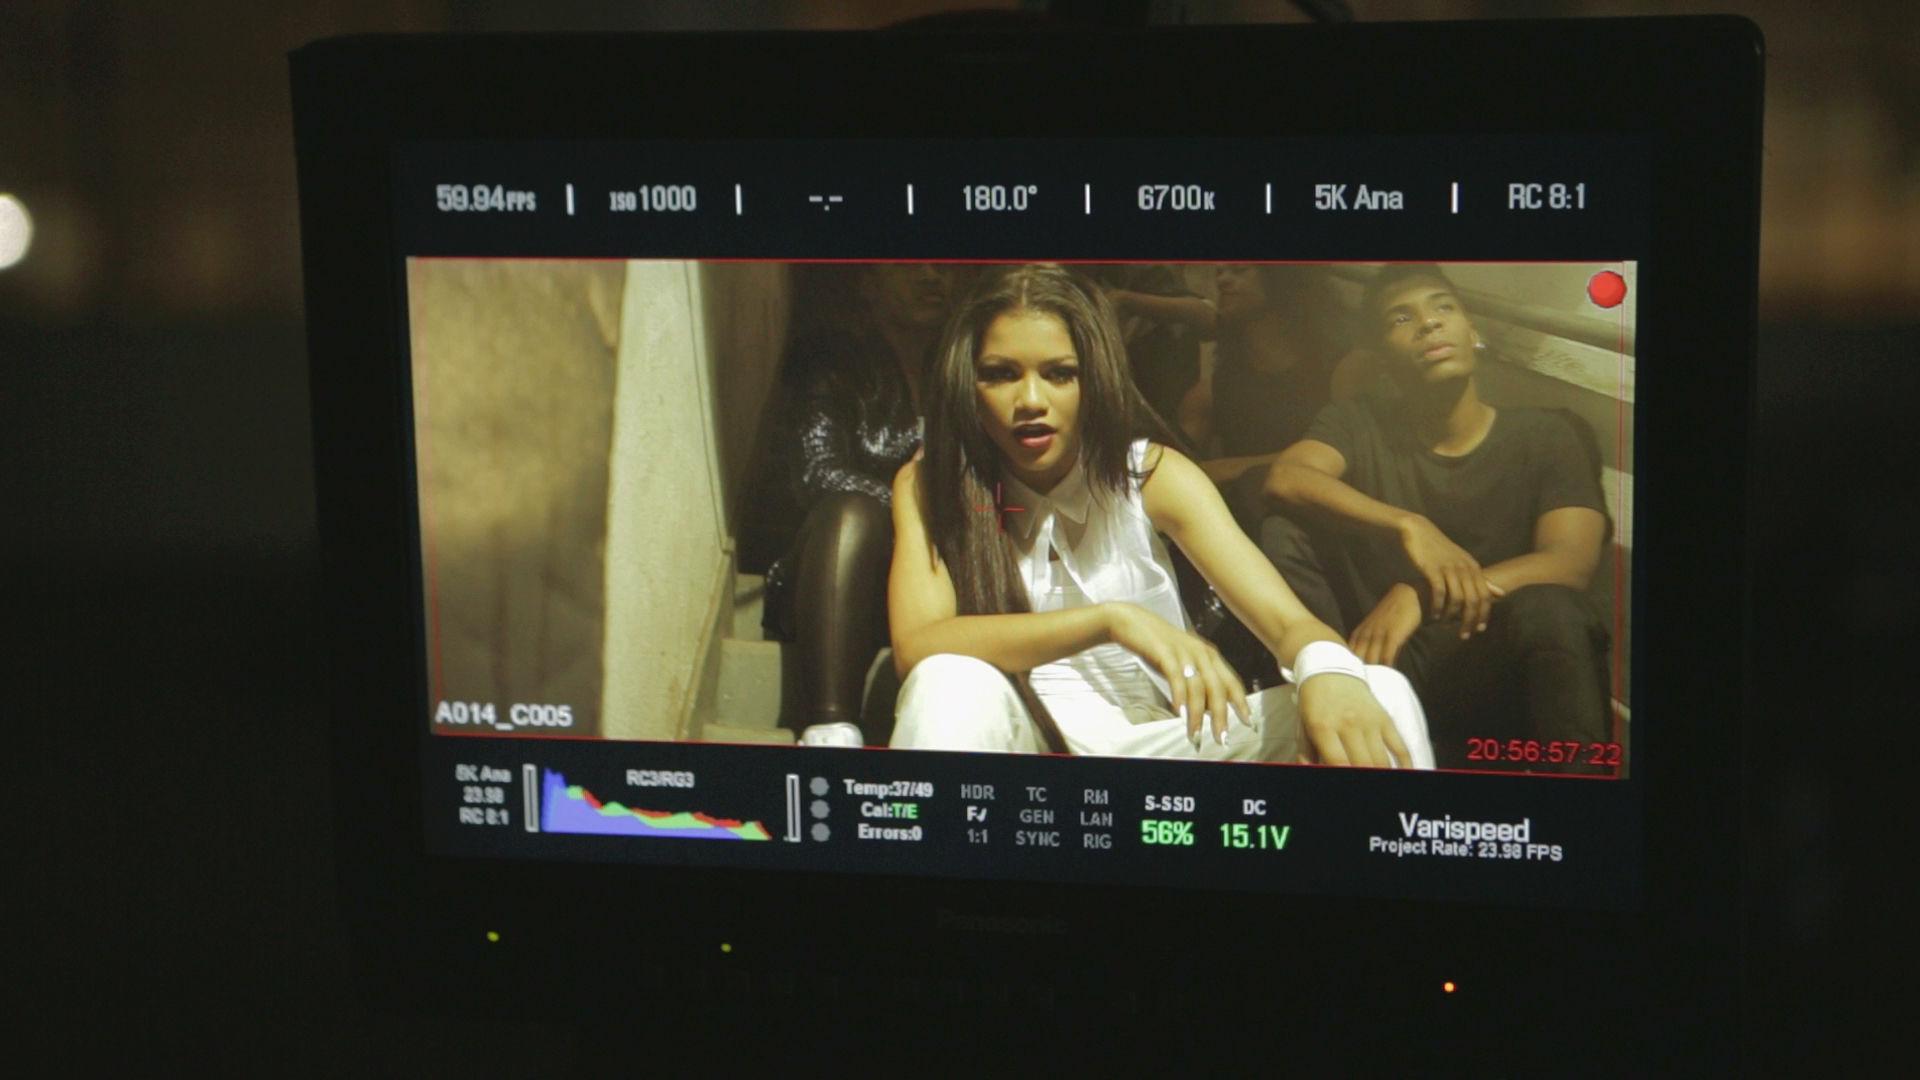 Zendaya - Replay - Behind the Scenes (Closed-Captioned)